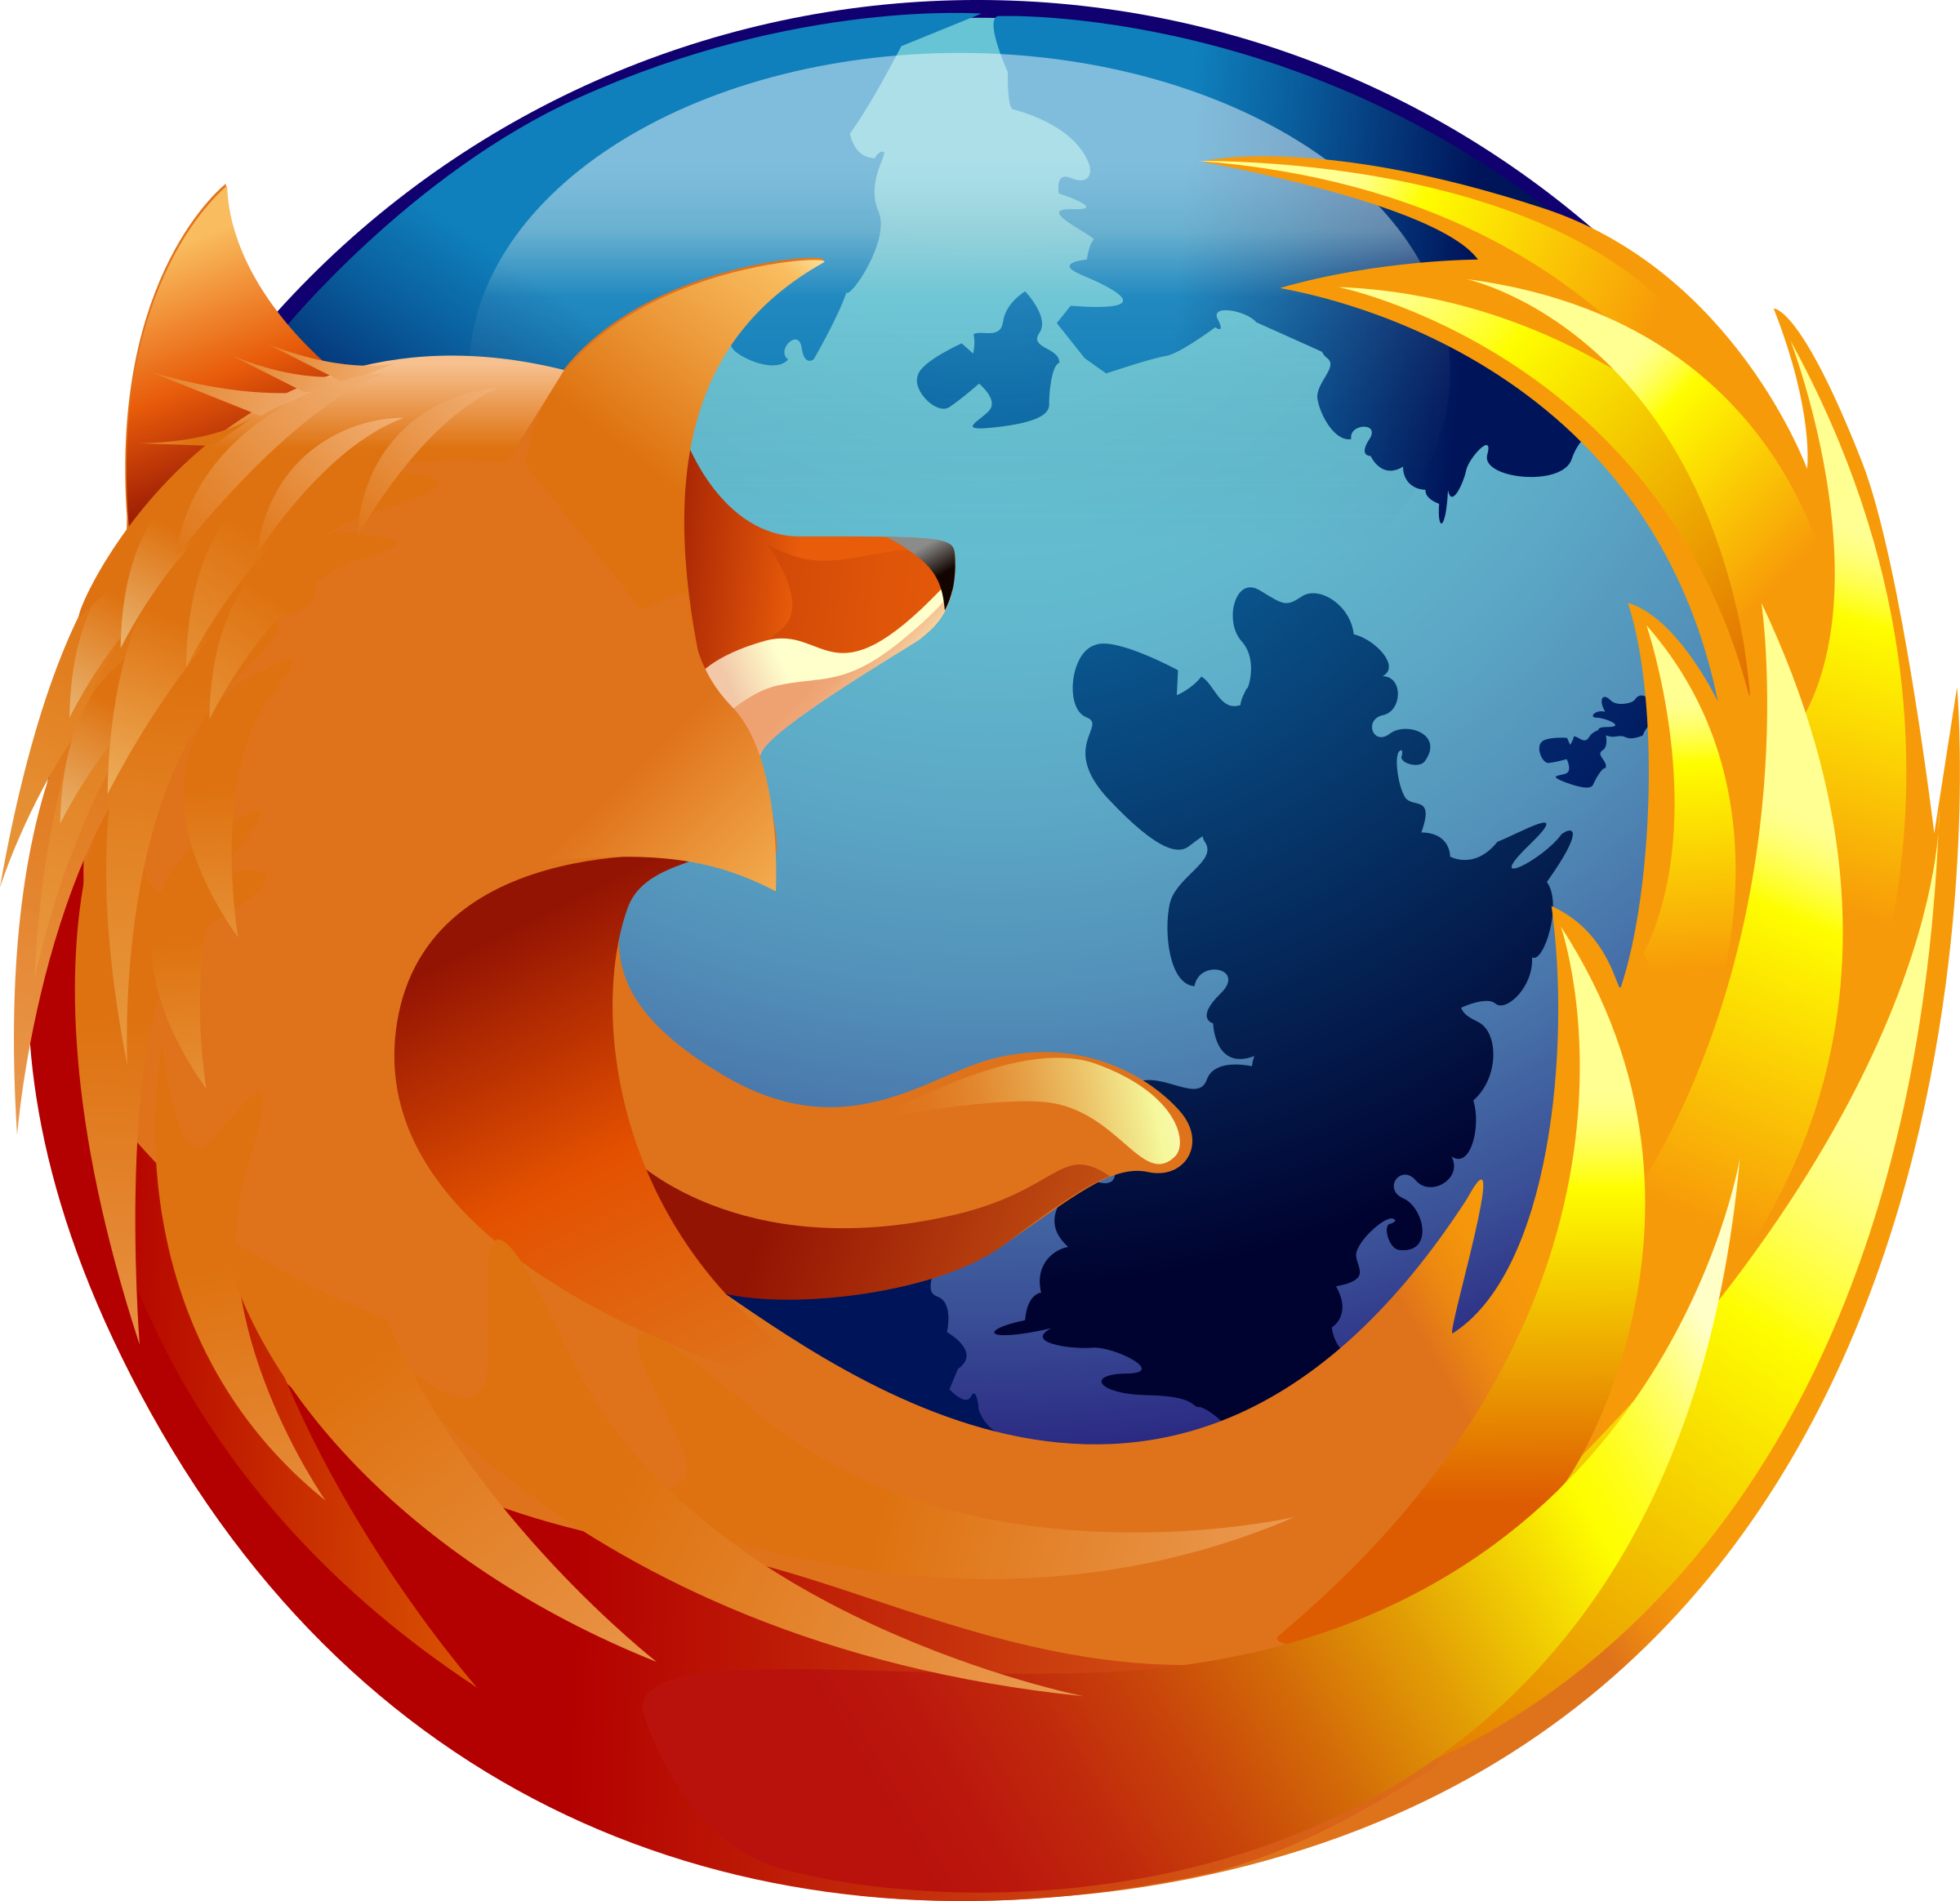 Computer Class: Introduction to Firefox